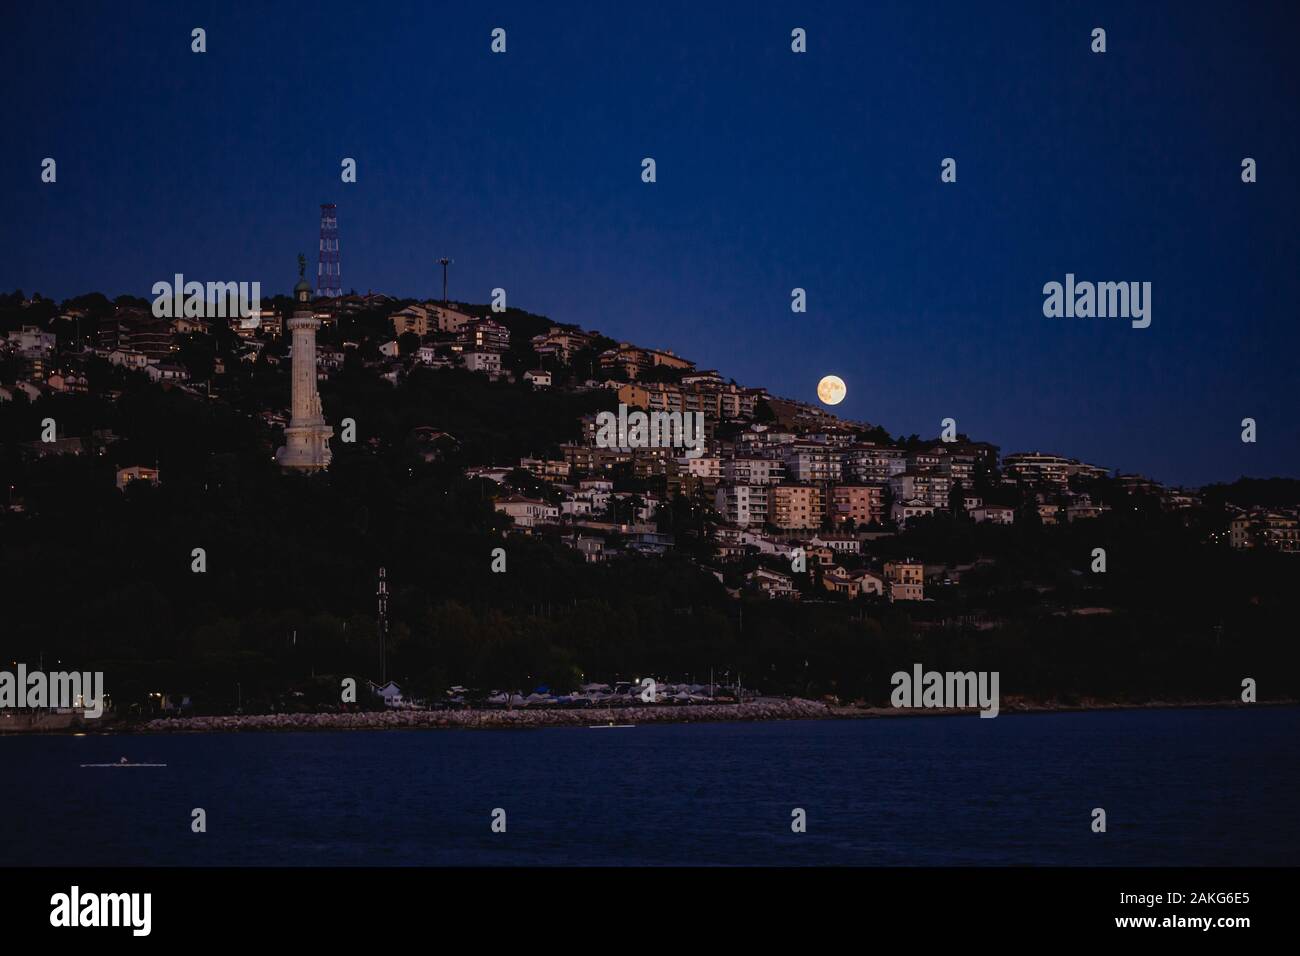 Trieste city skyline view at night with full moon rising from the mediterranean Sea. Famous light tower visible. Stock Photo